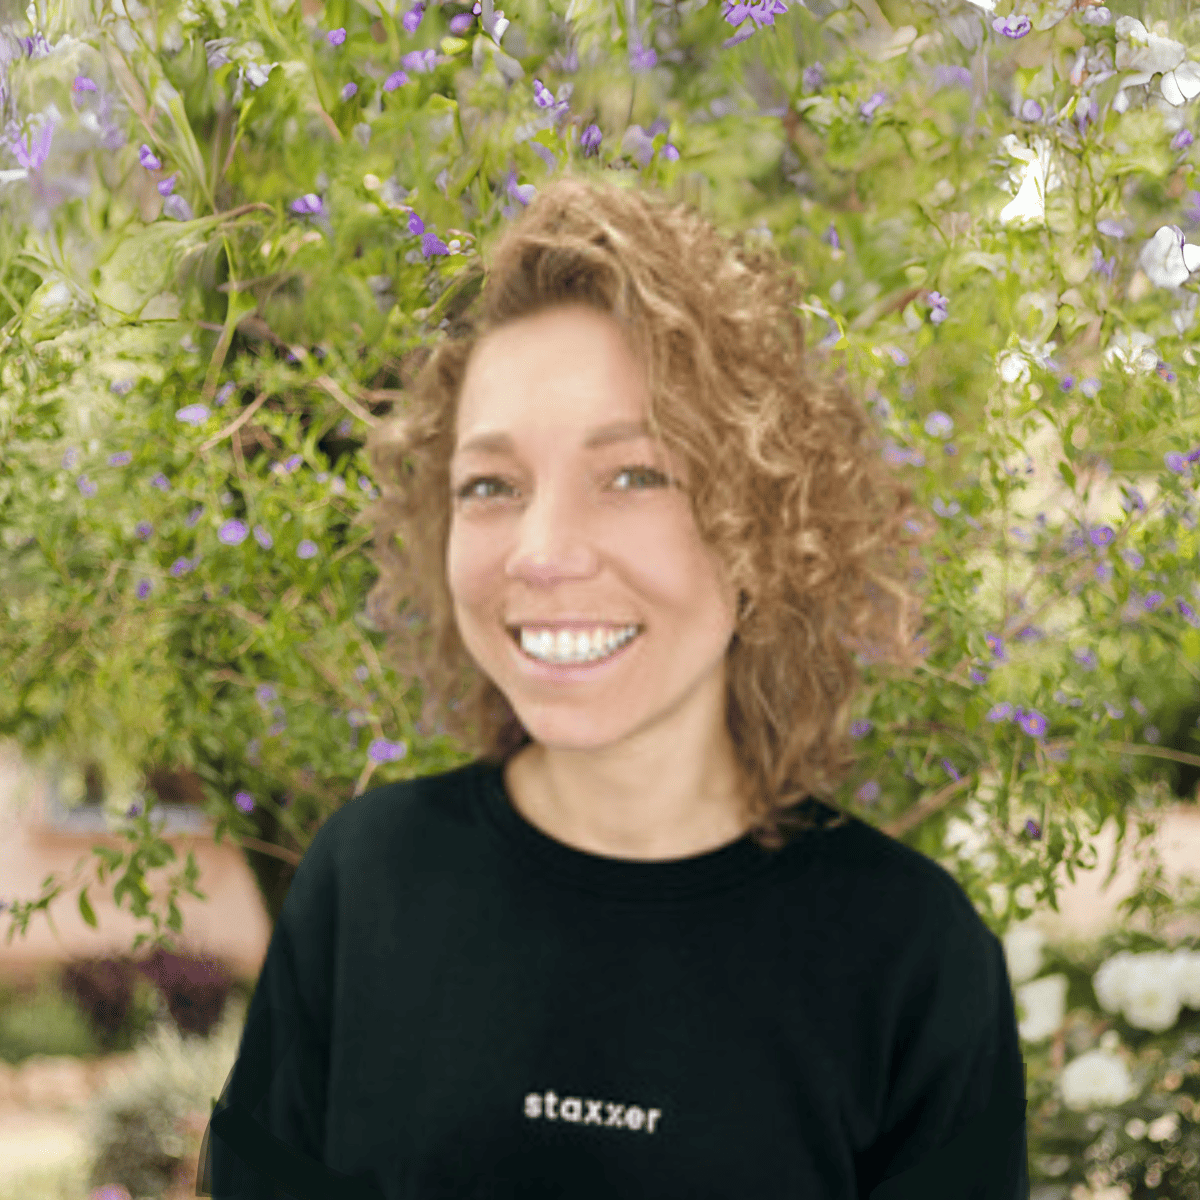 A woman with curly hair smiling among flowers.